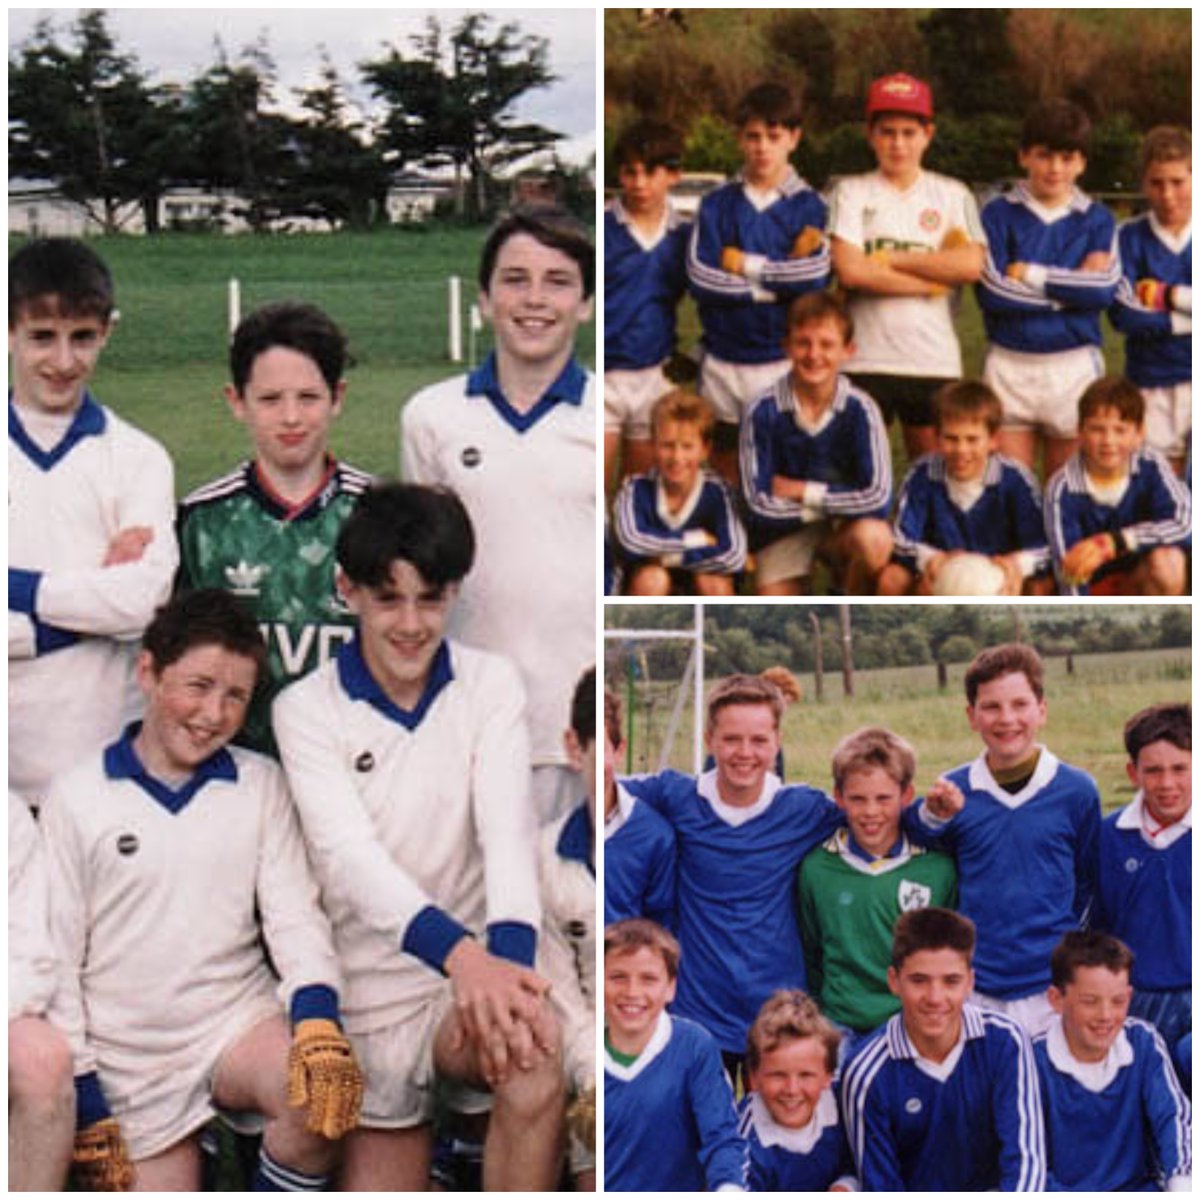 The @LauneRangers under-age keepers of the 1990s were a different breed